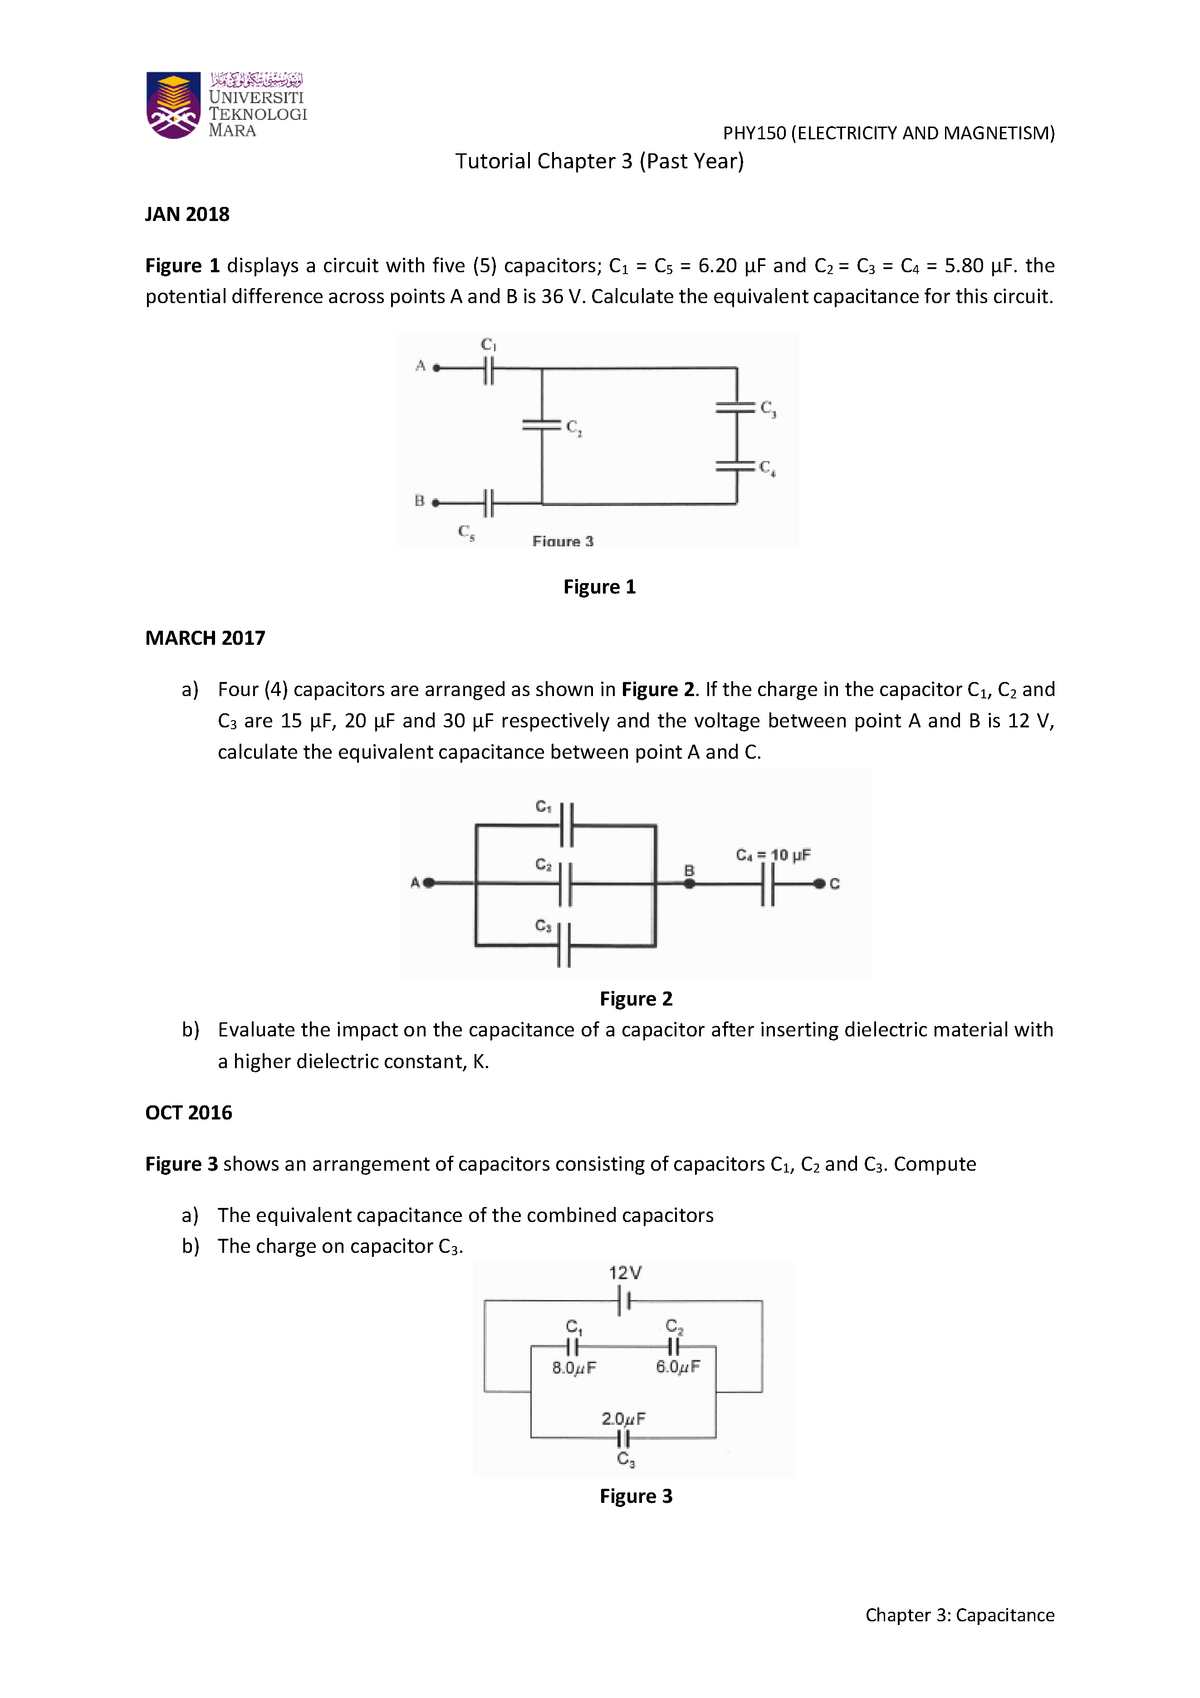 PHY150 CHAPTER 3 TUTORIAL + ANSWER - PHY150 (ELECTRICITY AND MAGNETISM ...